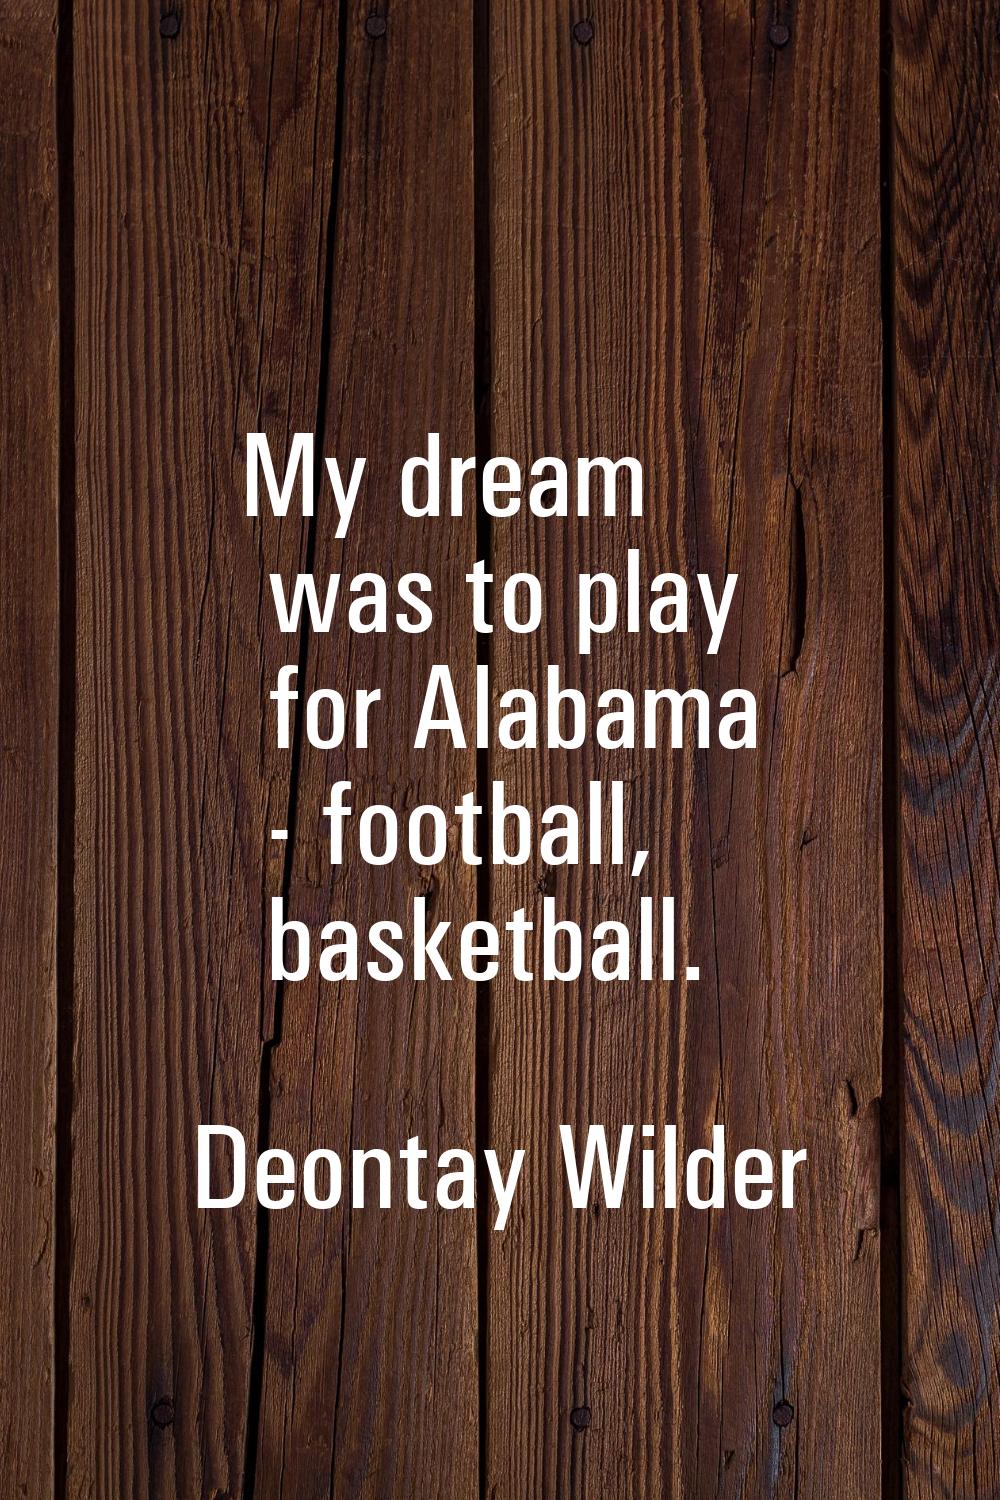 My dream was to play for Alabama - football, basketball.